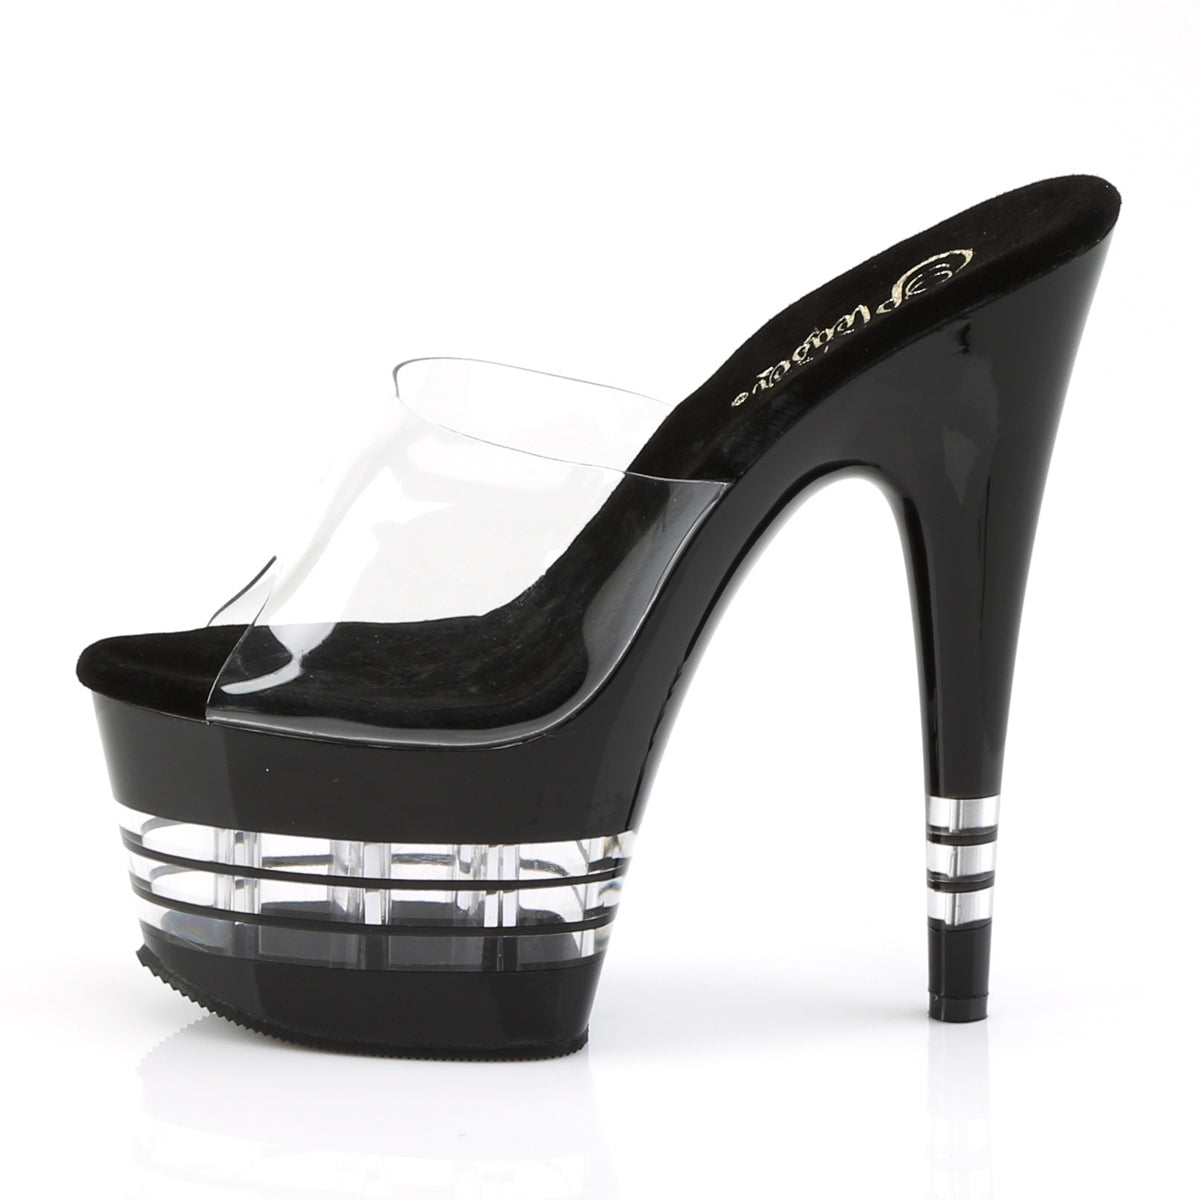 ADORE-701LN 7 Inch Heel Clear and Black Platforms Sexy Shoes-Pleaser- Sexy Shoes Pole Dance Heels